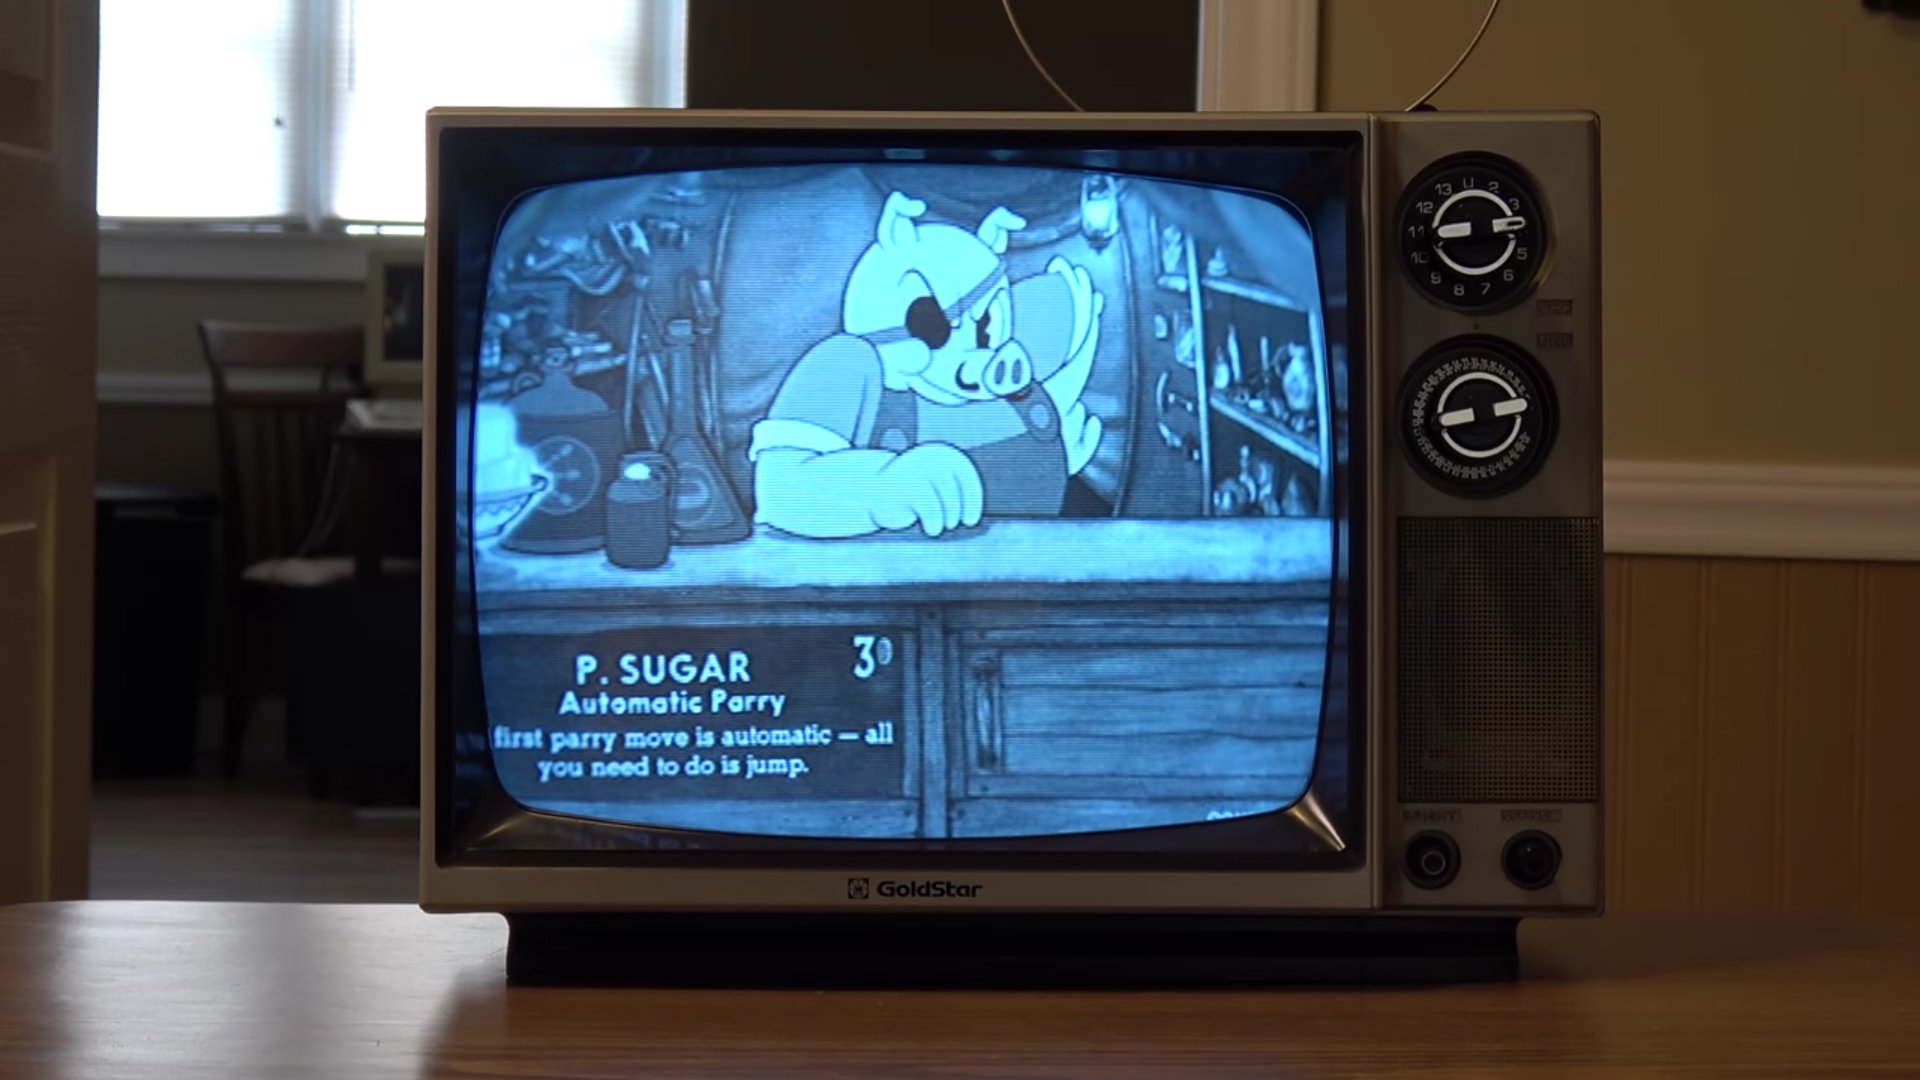 Cuphead looks right at home on this old television